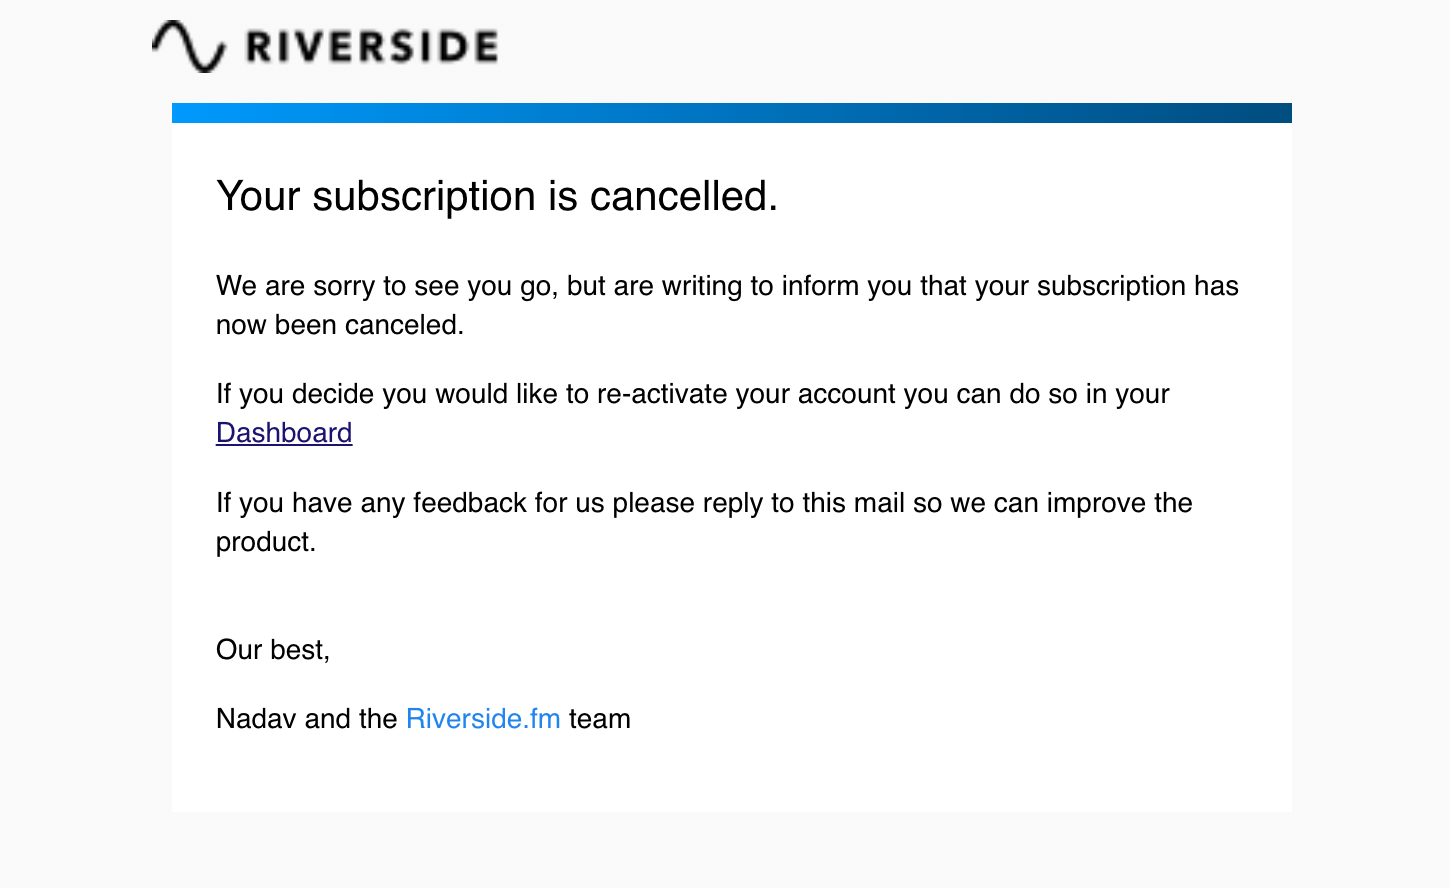 SaaS Cancellation Emails: Screenshot of Riverside's cancellation email